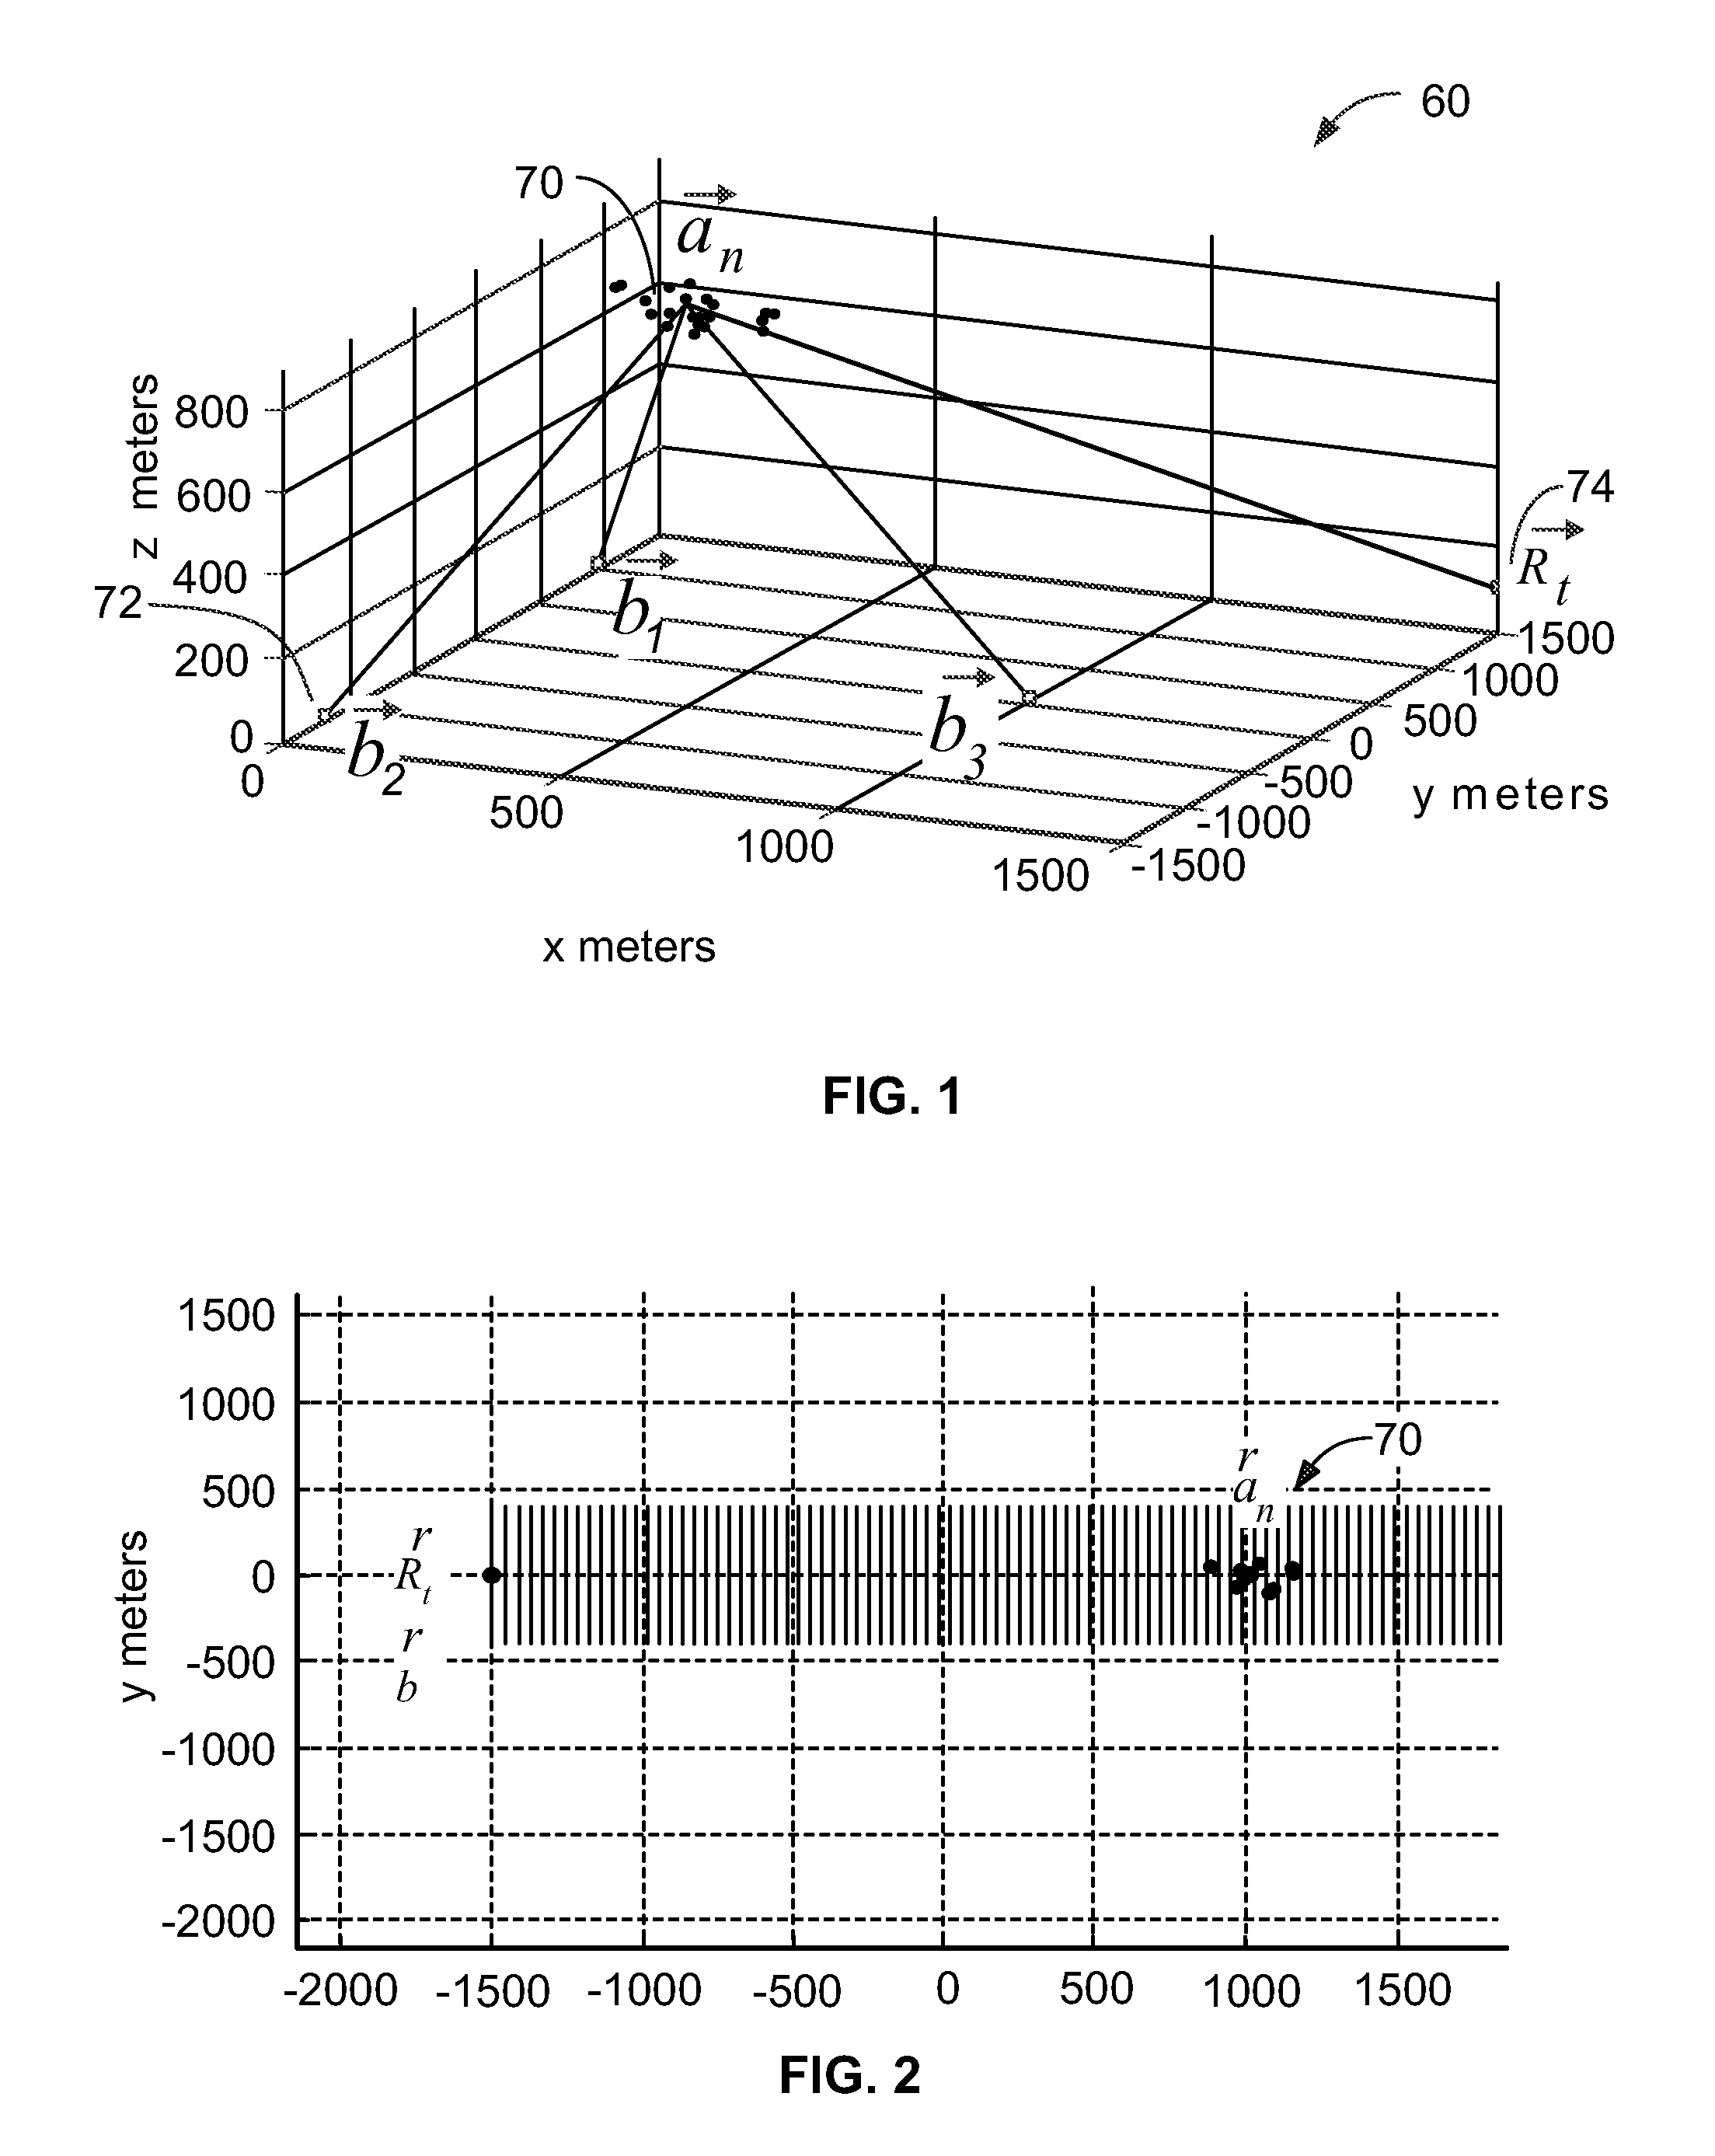 System and method to form coherent wavefronts for arbitrarily distributed phased arrays